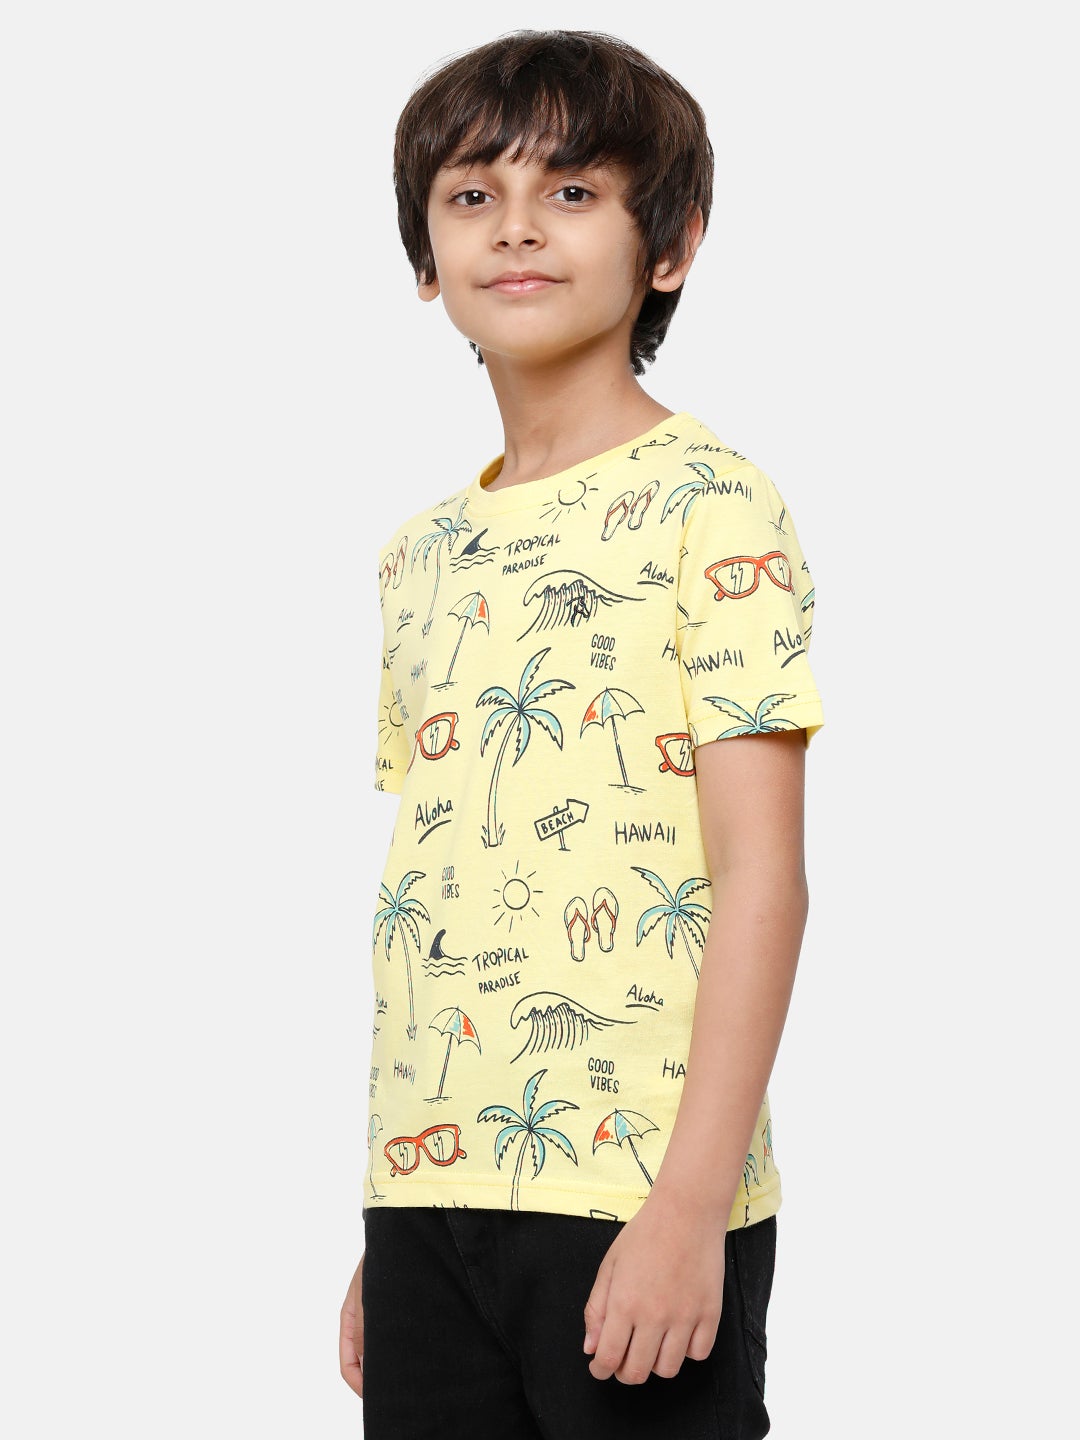 CP Boys Slim Fit Yellow Printed Round Neck T-Shirt T-shirt Classic Polo 